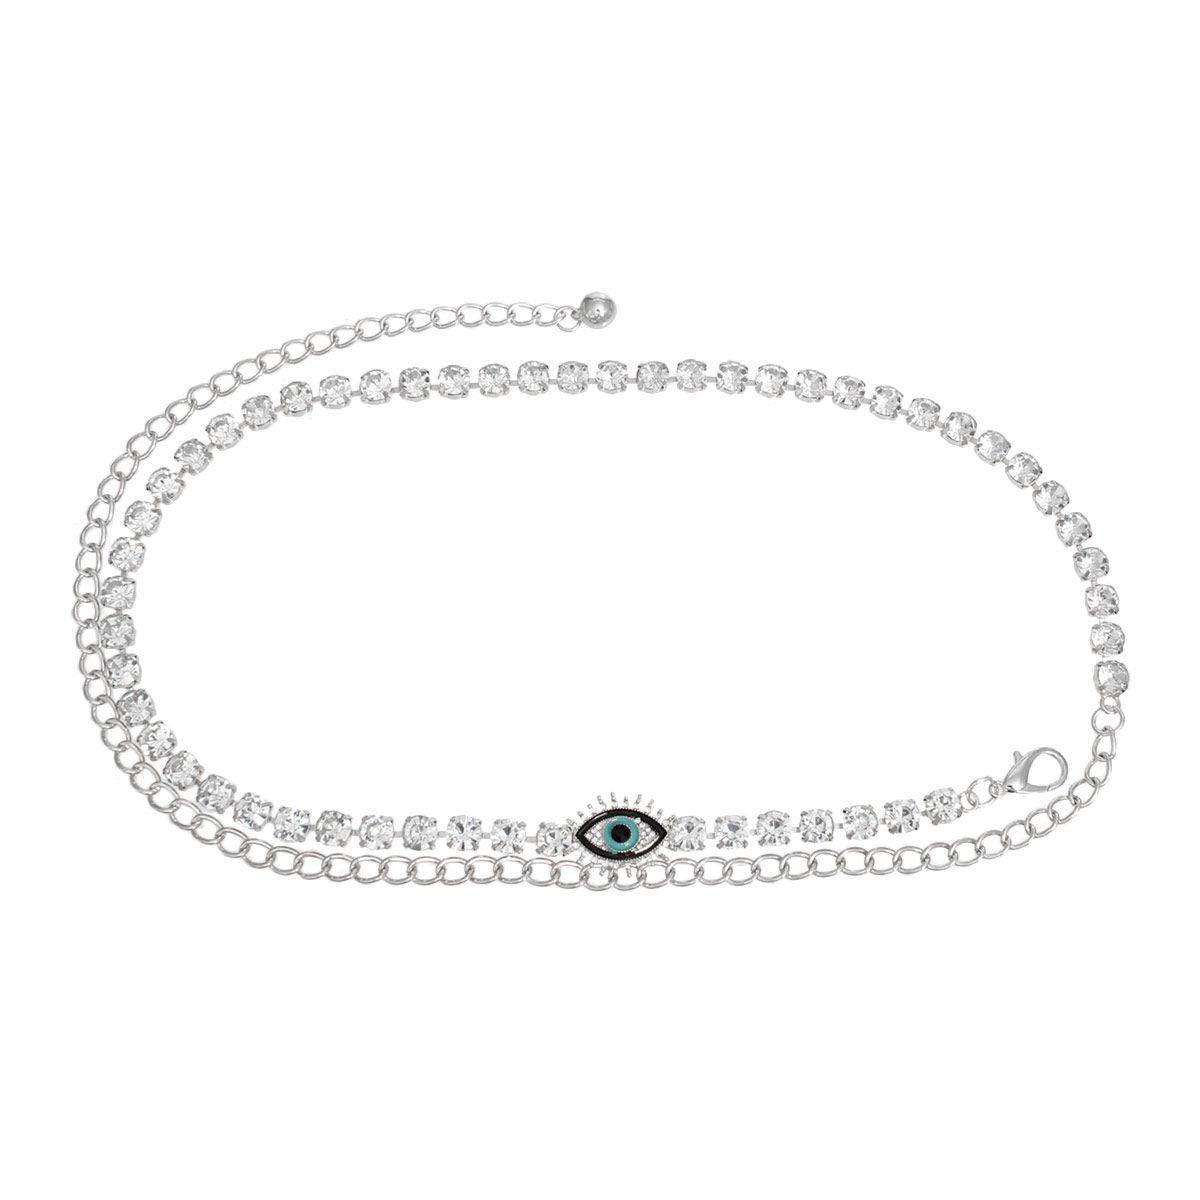 Style Your Silver Chain Rhinestone Belt with Evil Eye Accent for a Glamorous Look